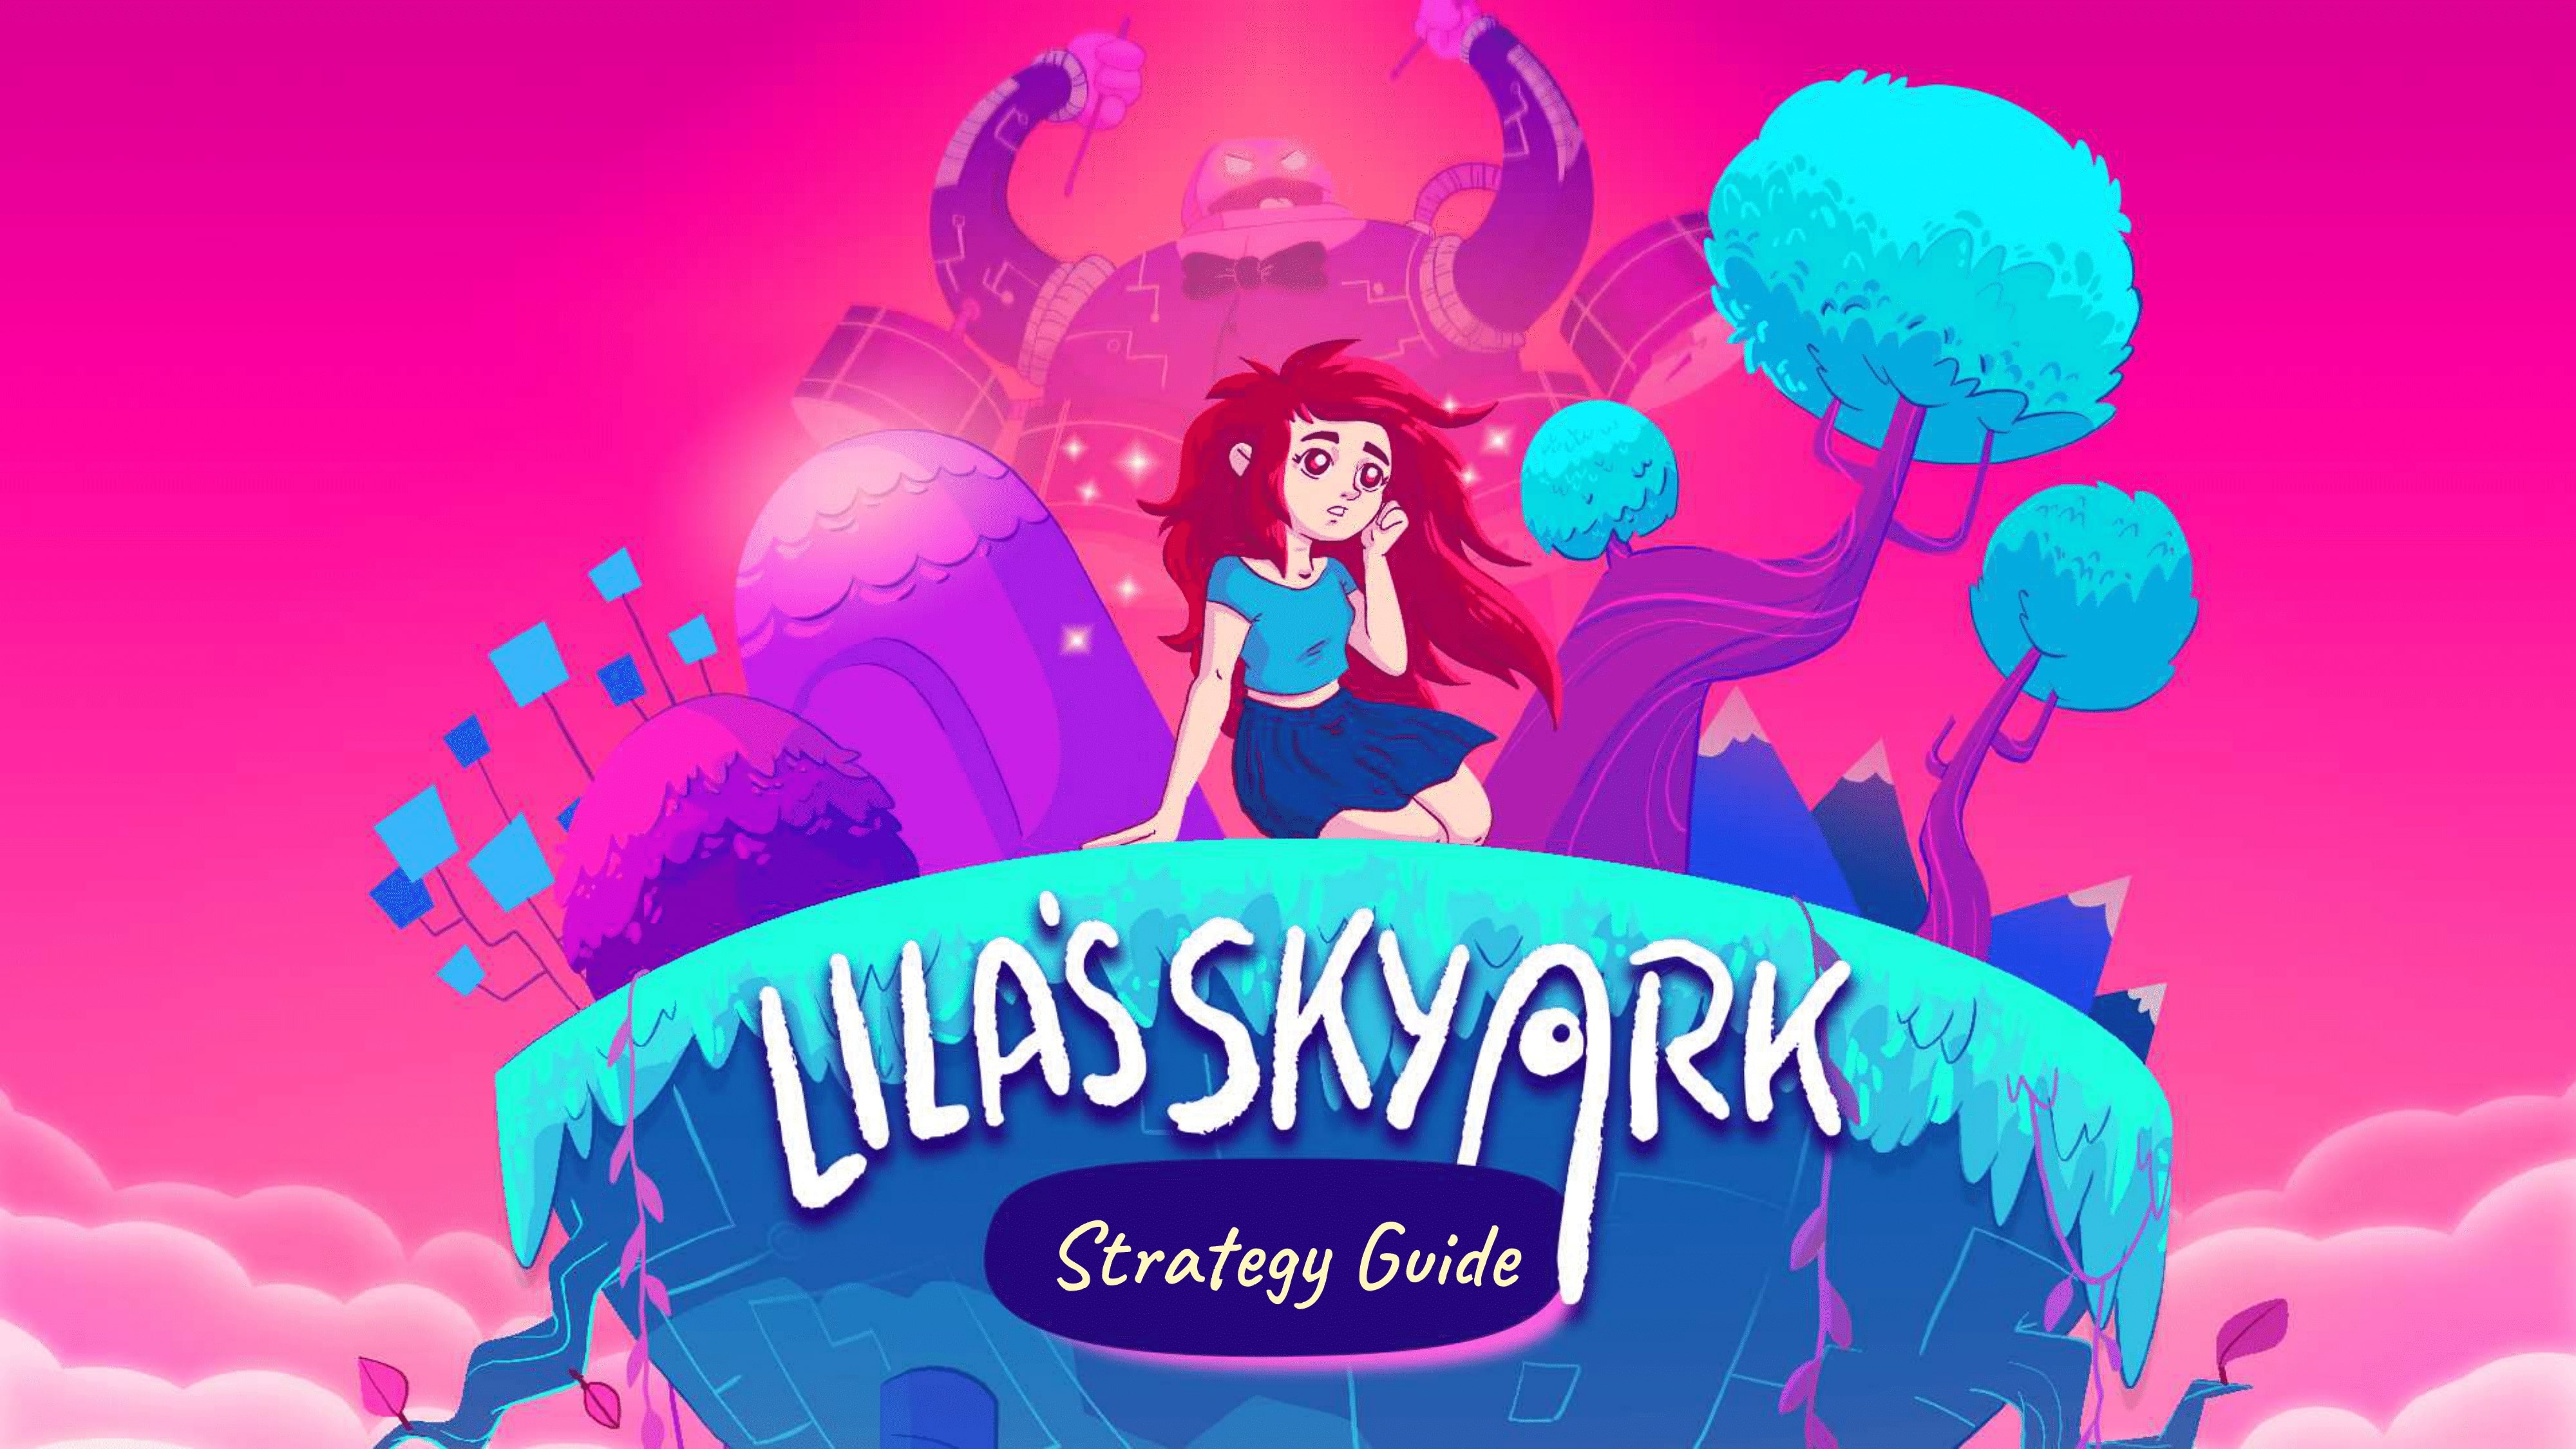 Lila’s Sky Ark Official Strategy Guide & Walkthrough - Cover, Contents & About - 27BF0E6